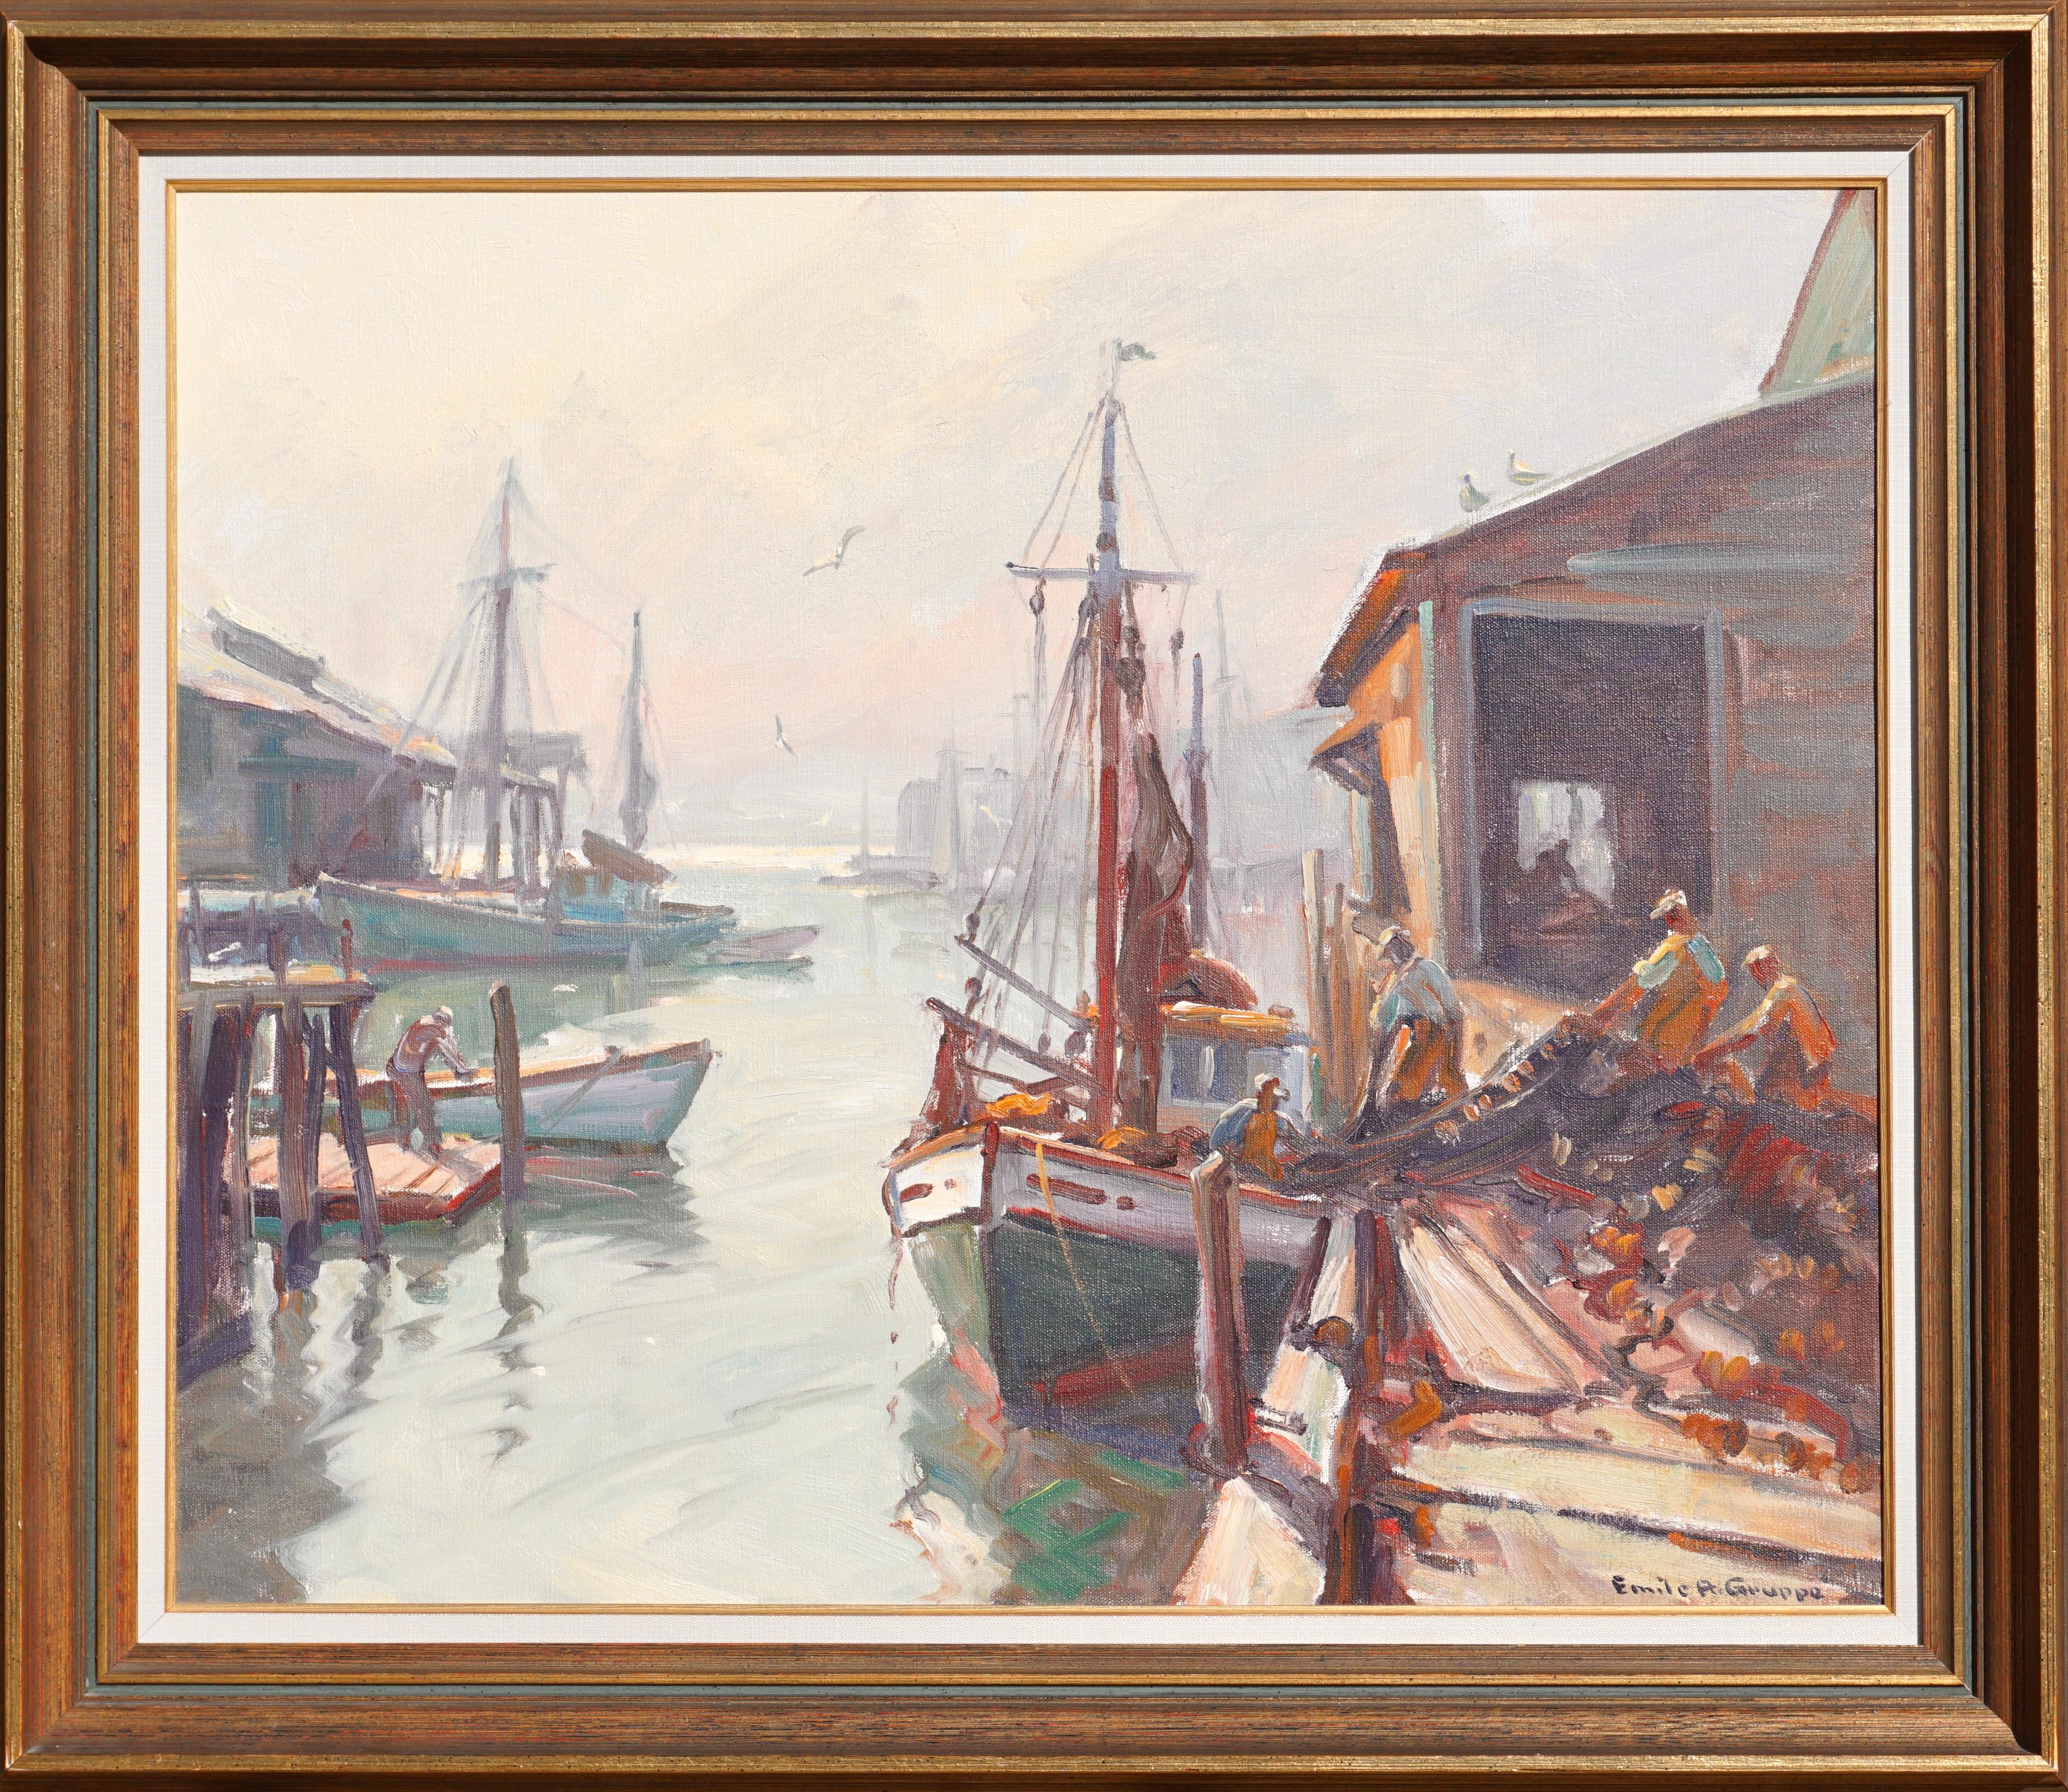 Emile Albert Gruppe (American, 1896-1978) Post Impressionist
Titled Verso: “Hauling The Nets”
Oil on canvas
Canvas: 25 x 30 inches (63.5 x 76.2 cm)
Framed Dimensions 31 X 36 Inches
Signed lower right: Emile A. Gruppe

Condition: Excellent.